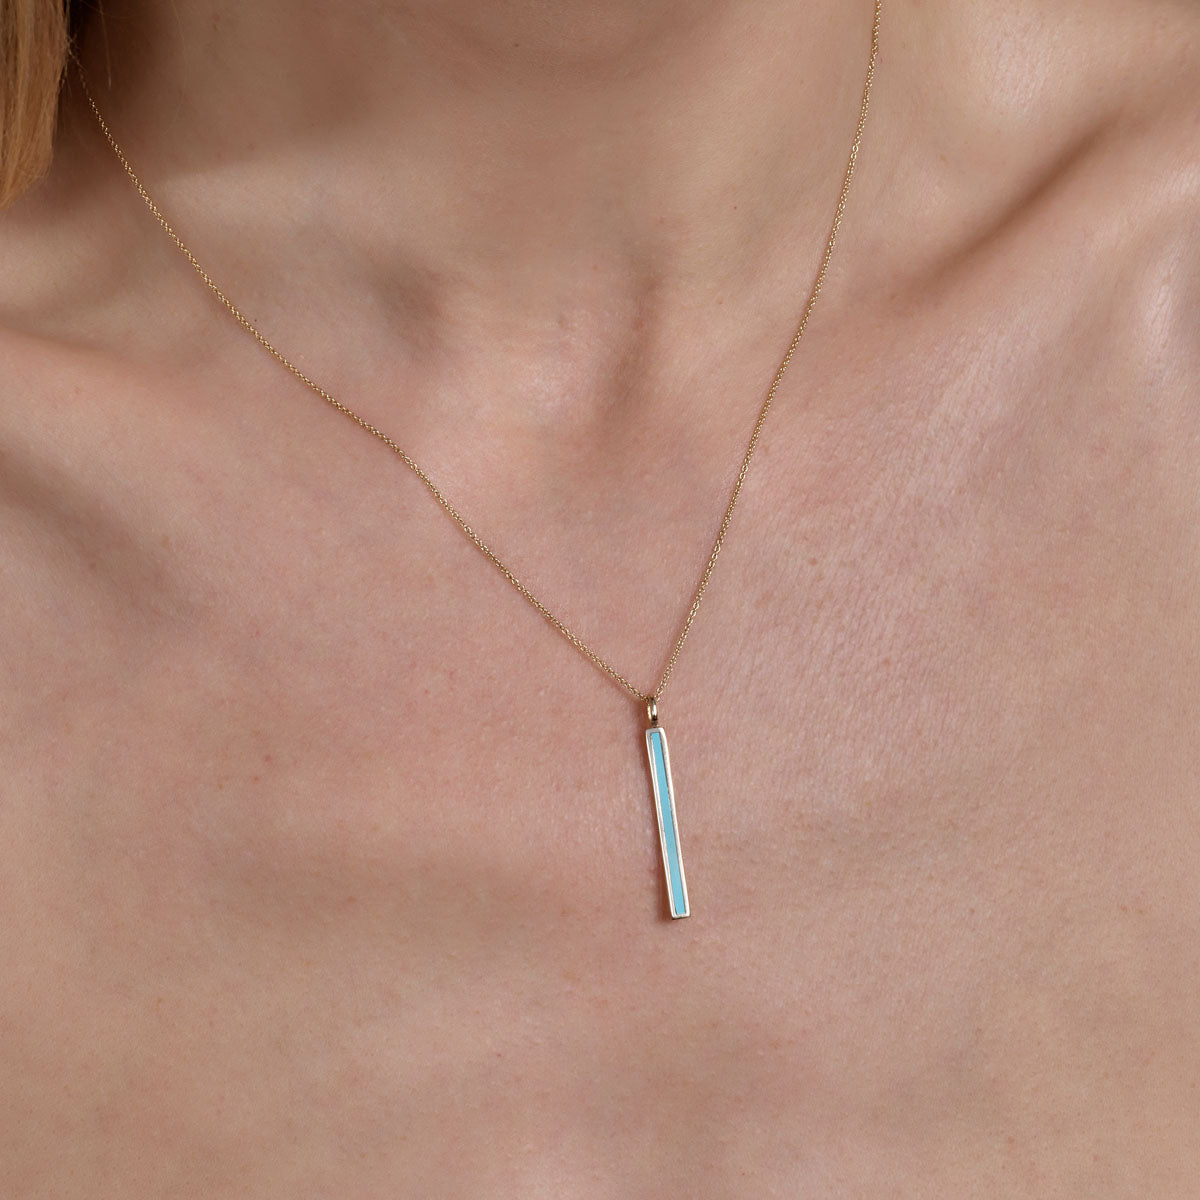 gold turquoise long bar necklace on models neck